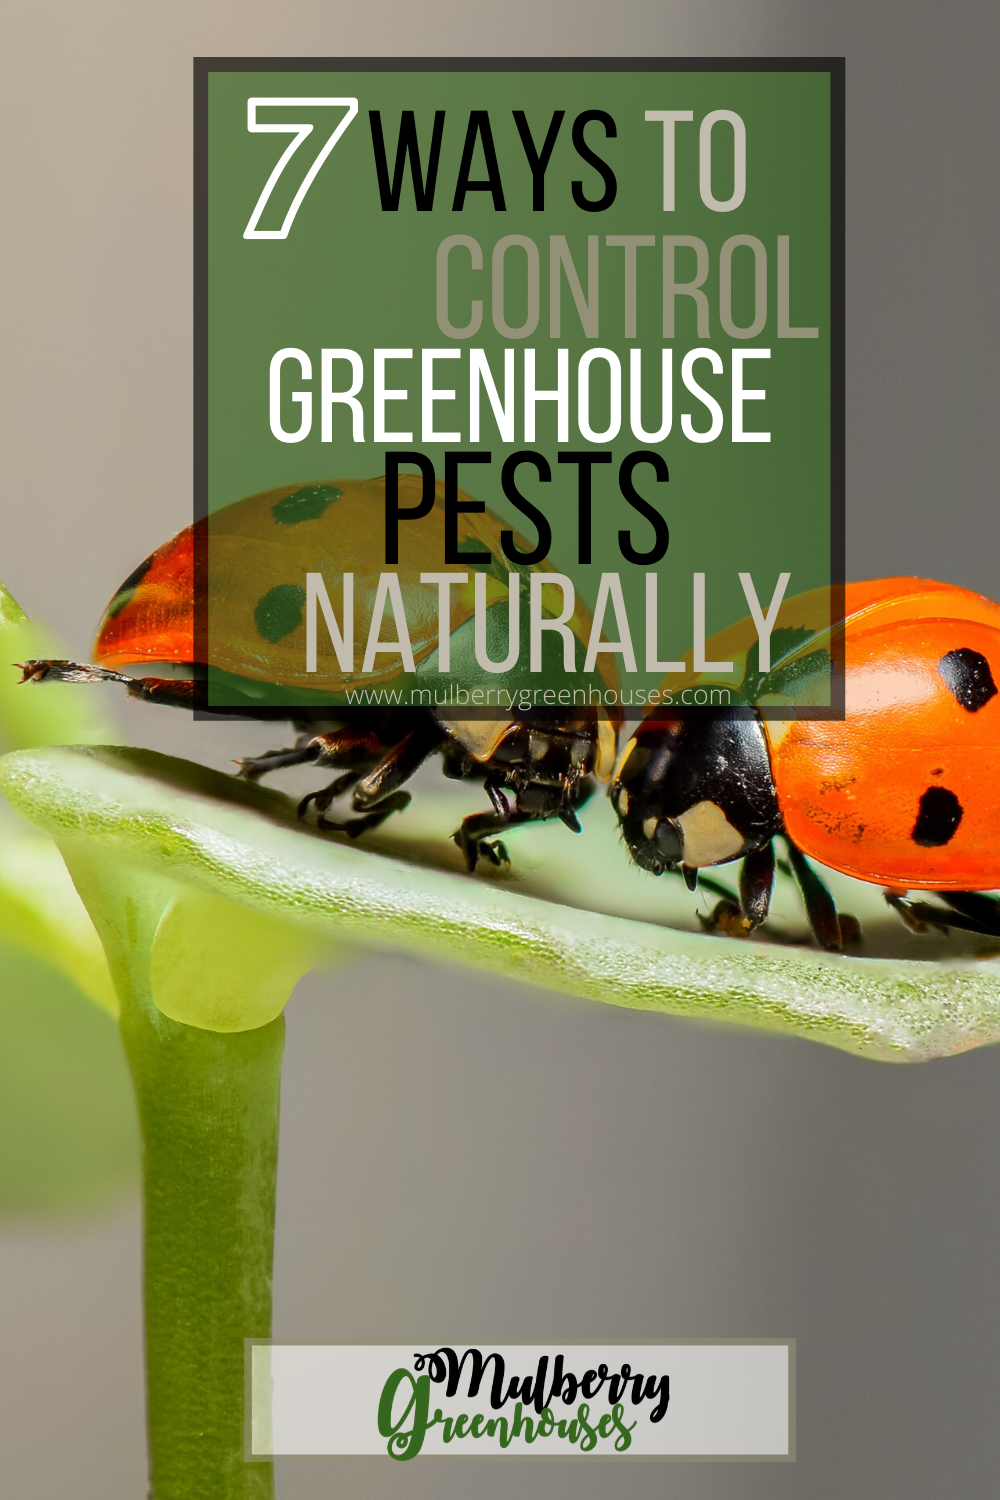 7 ways to control Greenhouse Pests Naturally